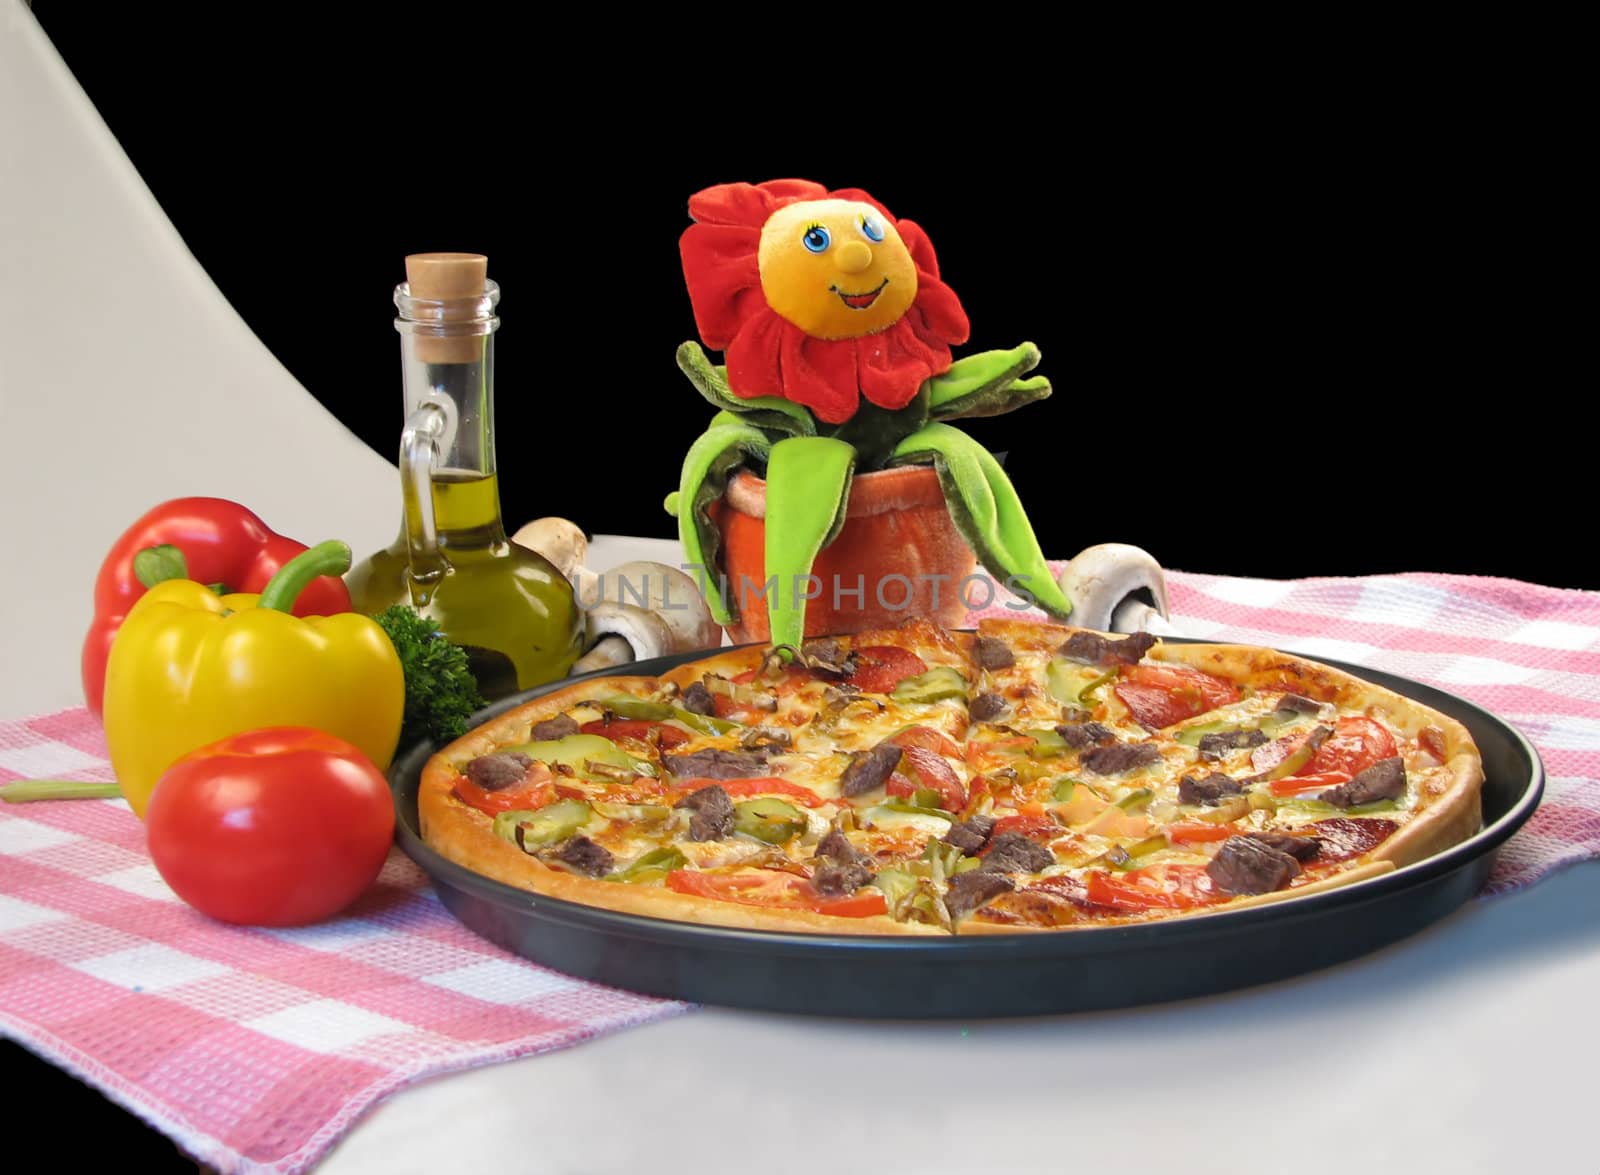 Pizza with a decorative toy by Svetovid